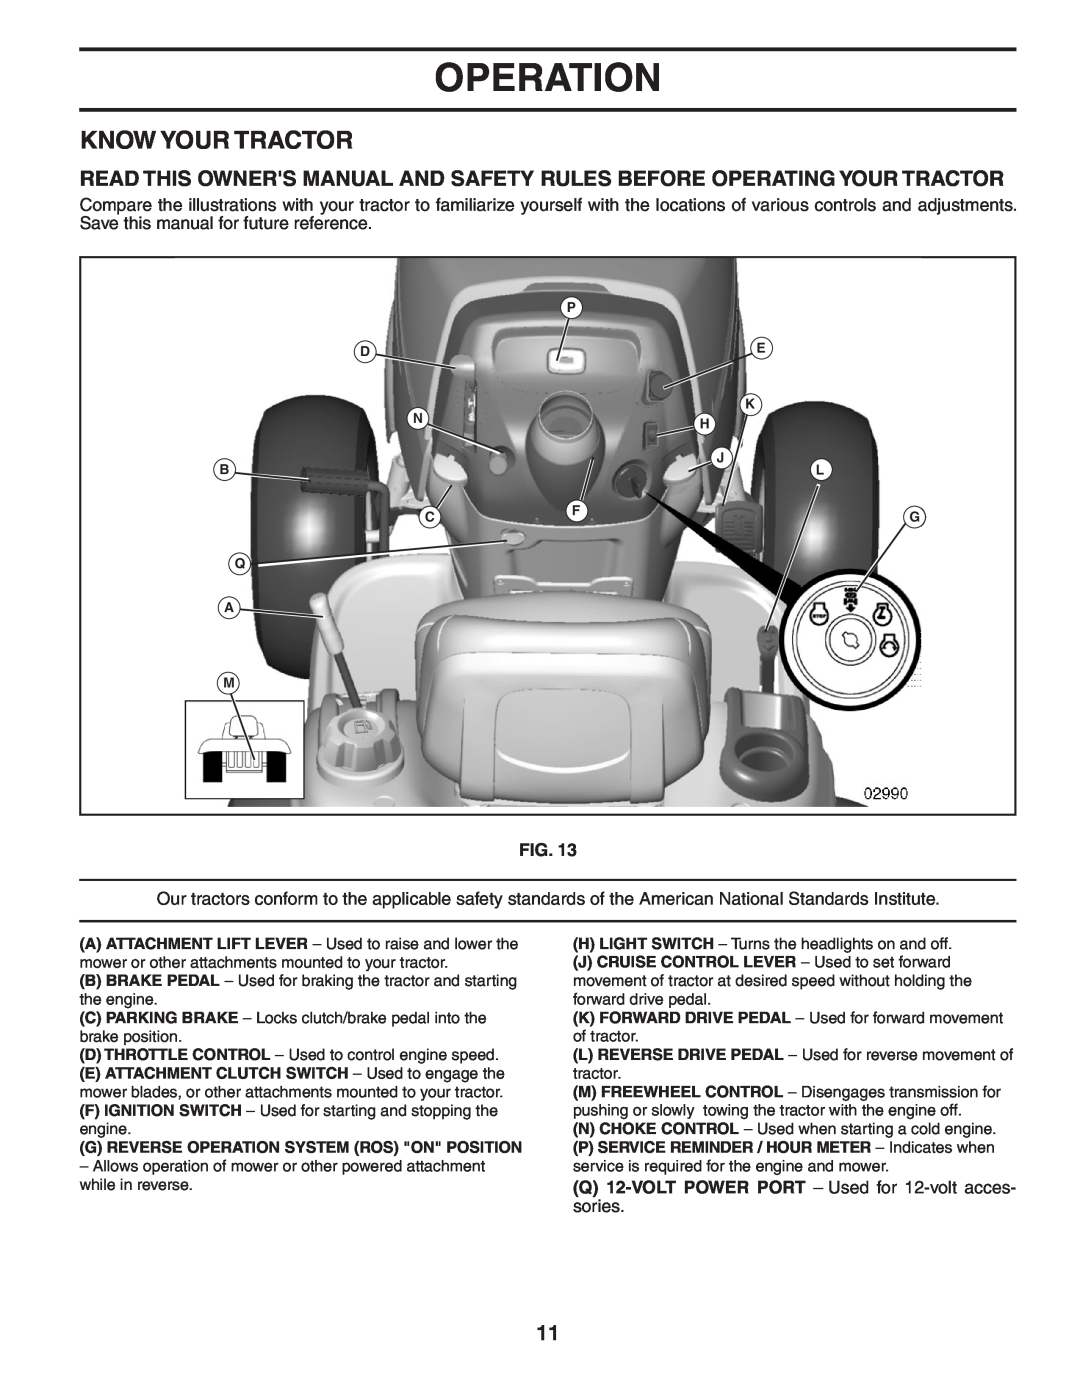 Poulan PBGT22H48 manual Know Your Tractor, Operation 